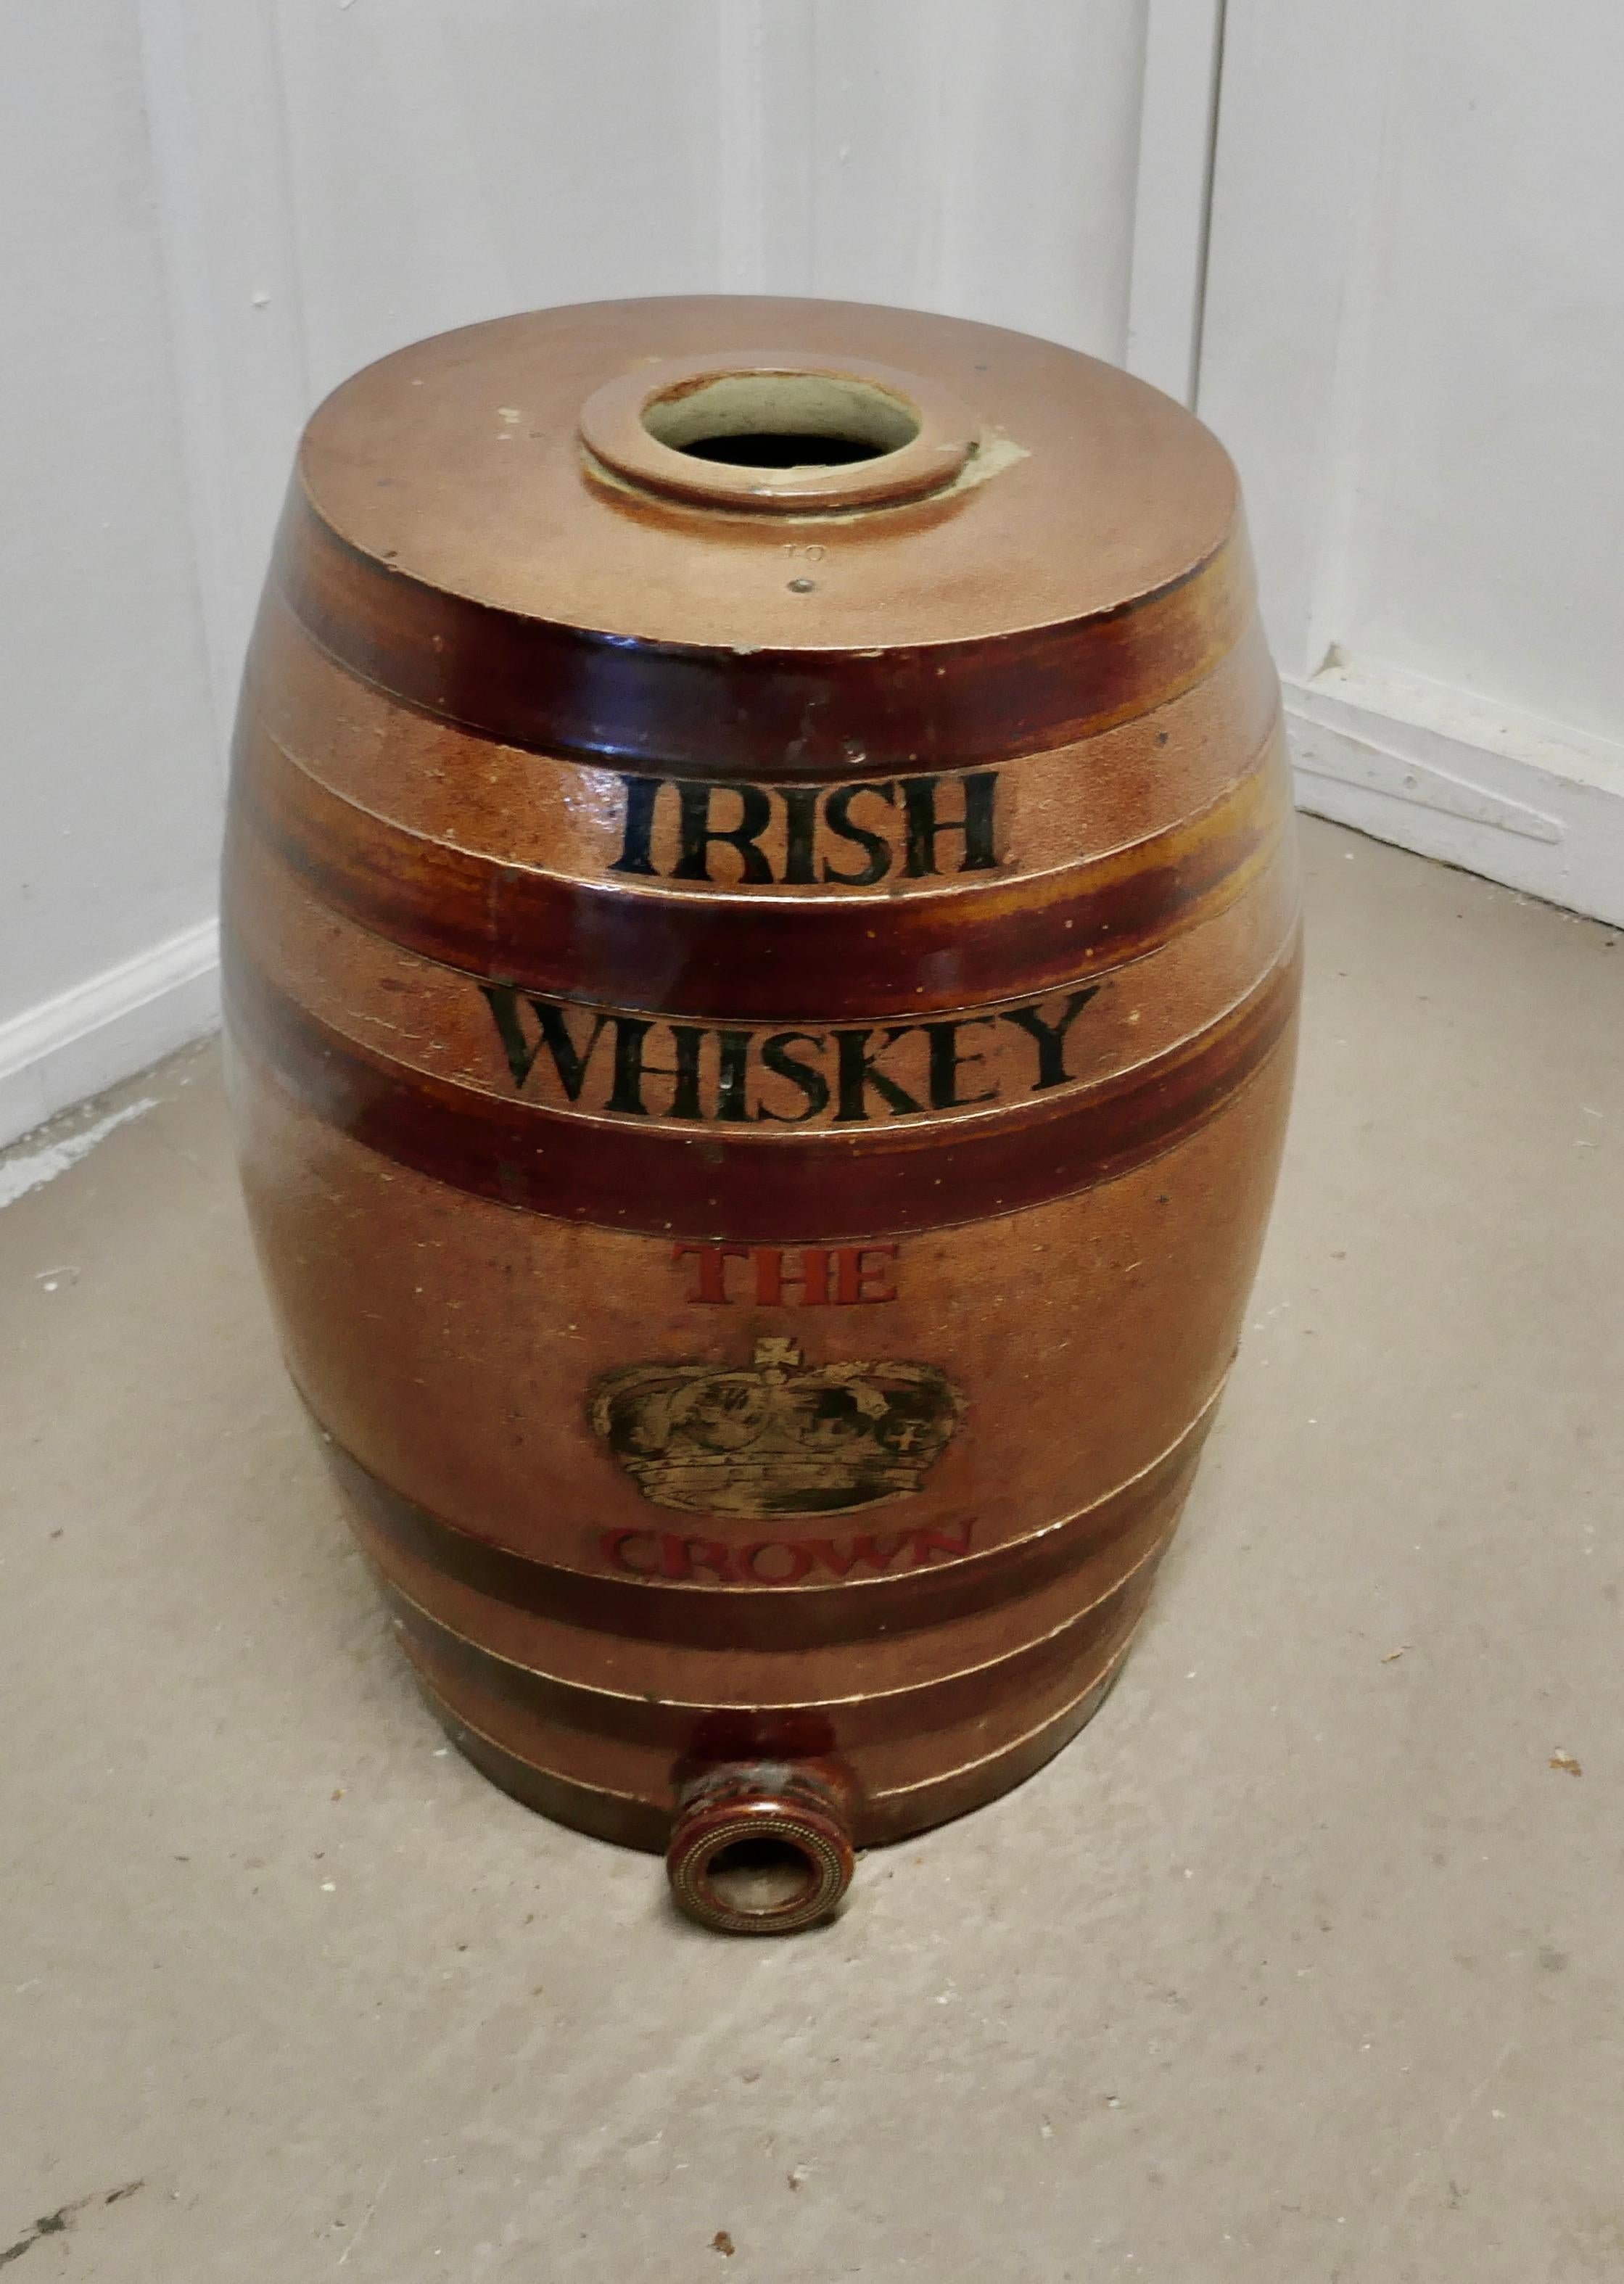 A 19th century 10-gallon stoneware Irish whiskey barrel, from the Crown Inn

A very large stoneware whiskey barrel it is in good condition with minor chips, it has the traditional hooped design and it has a socket for a tap at the bottom

This